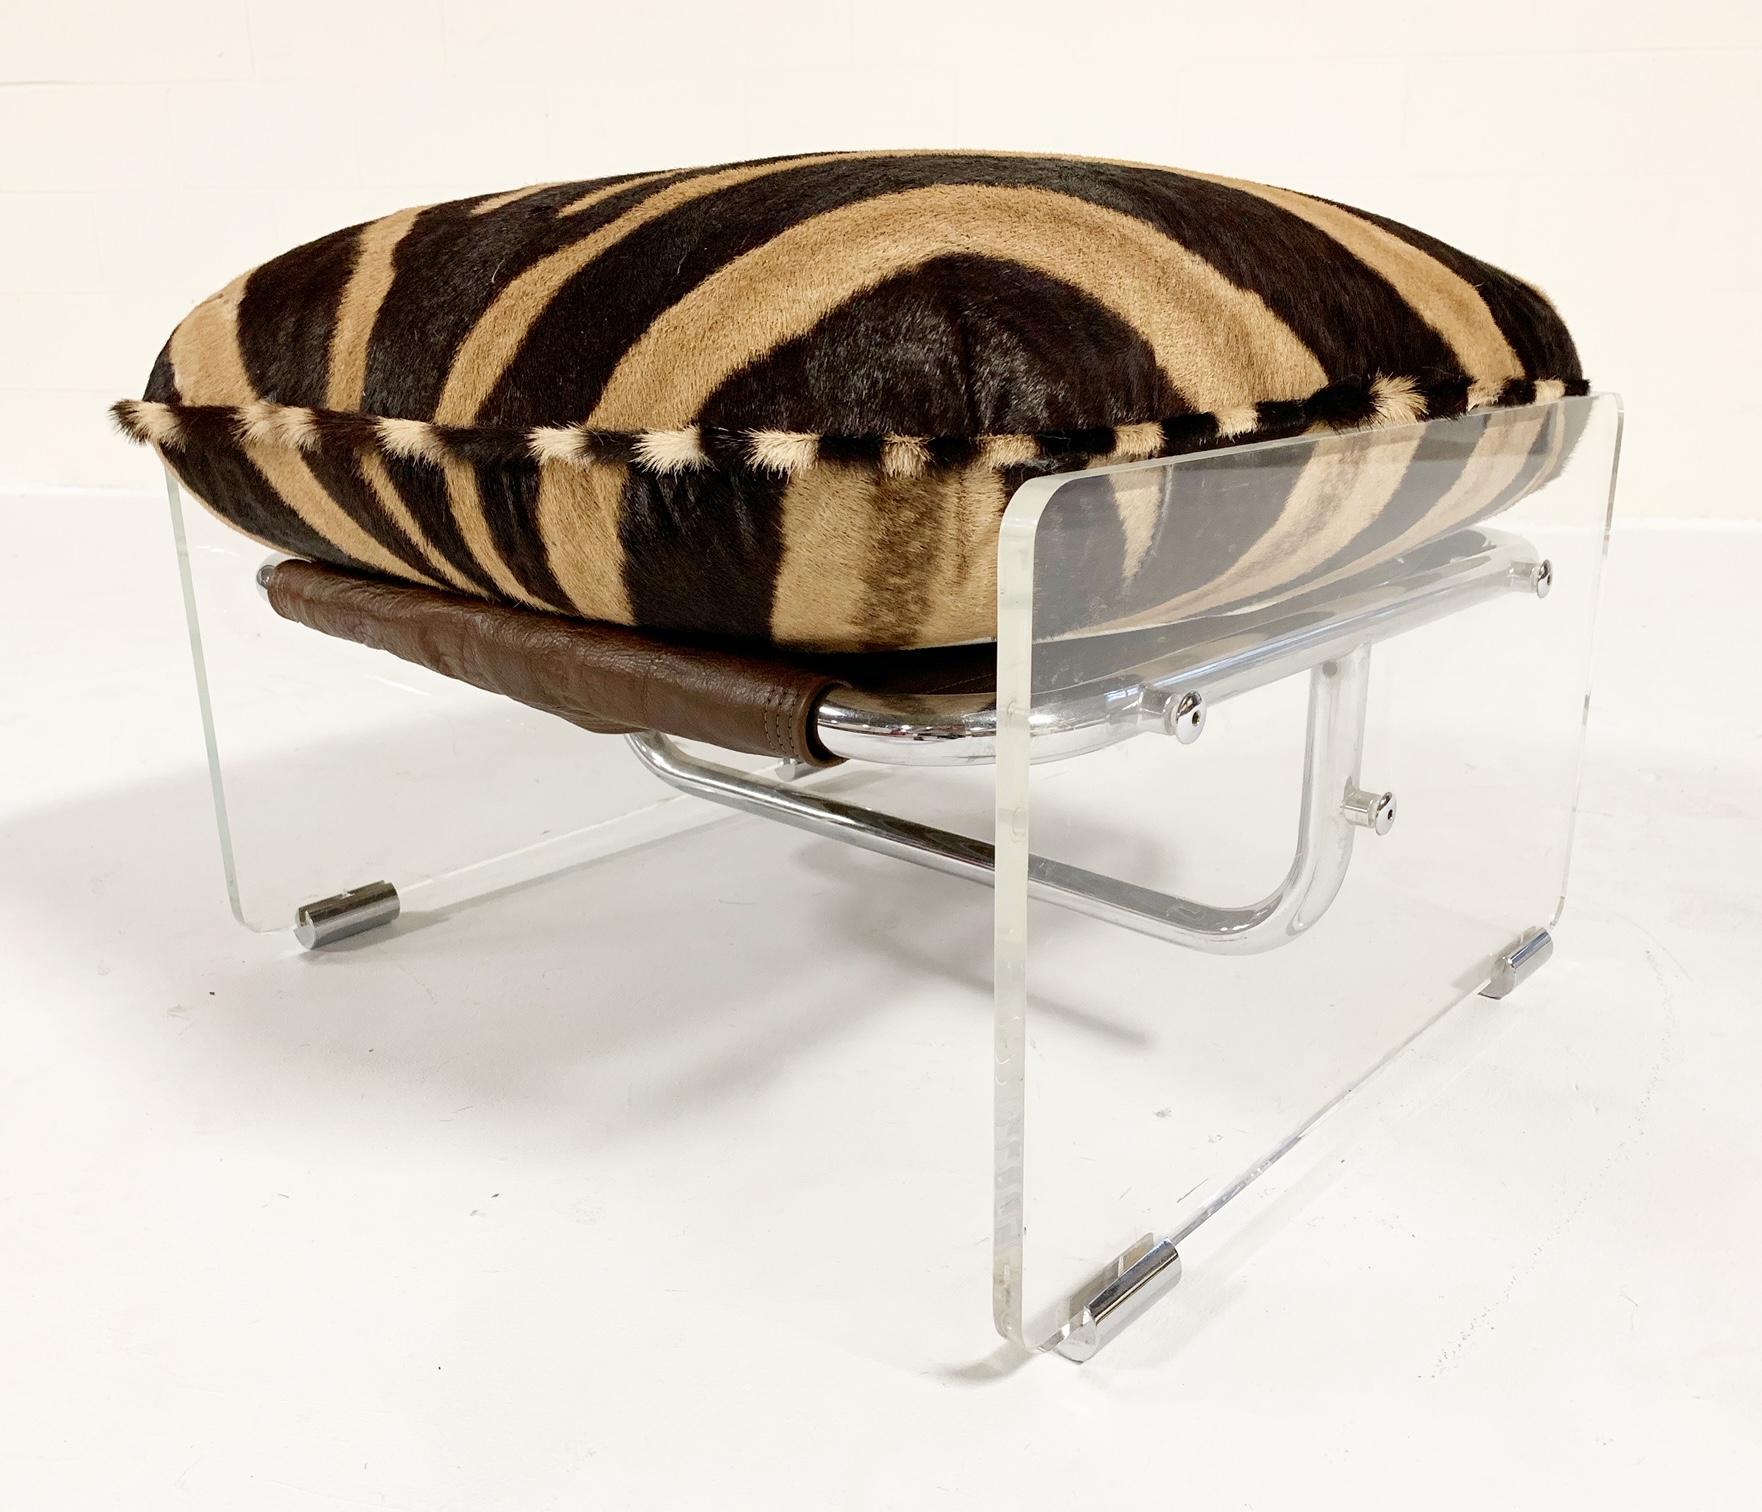 This amazing 1970s Pace Collection lounge chair and ottoman features thick Lucite panels with chrome details. Suede and wool straps wrap the tubular chrome frame to support the cushions. The loose cushions have been masterfully upholstered in zebra